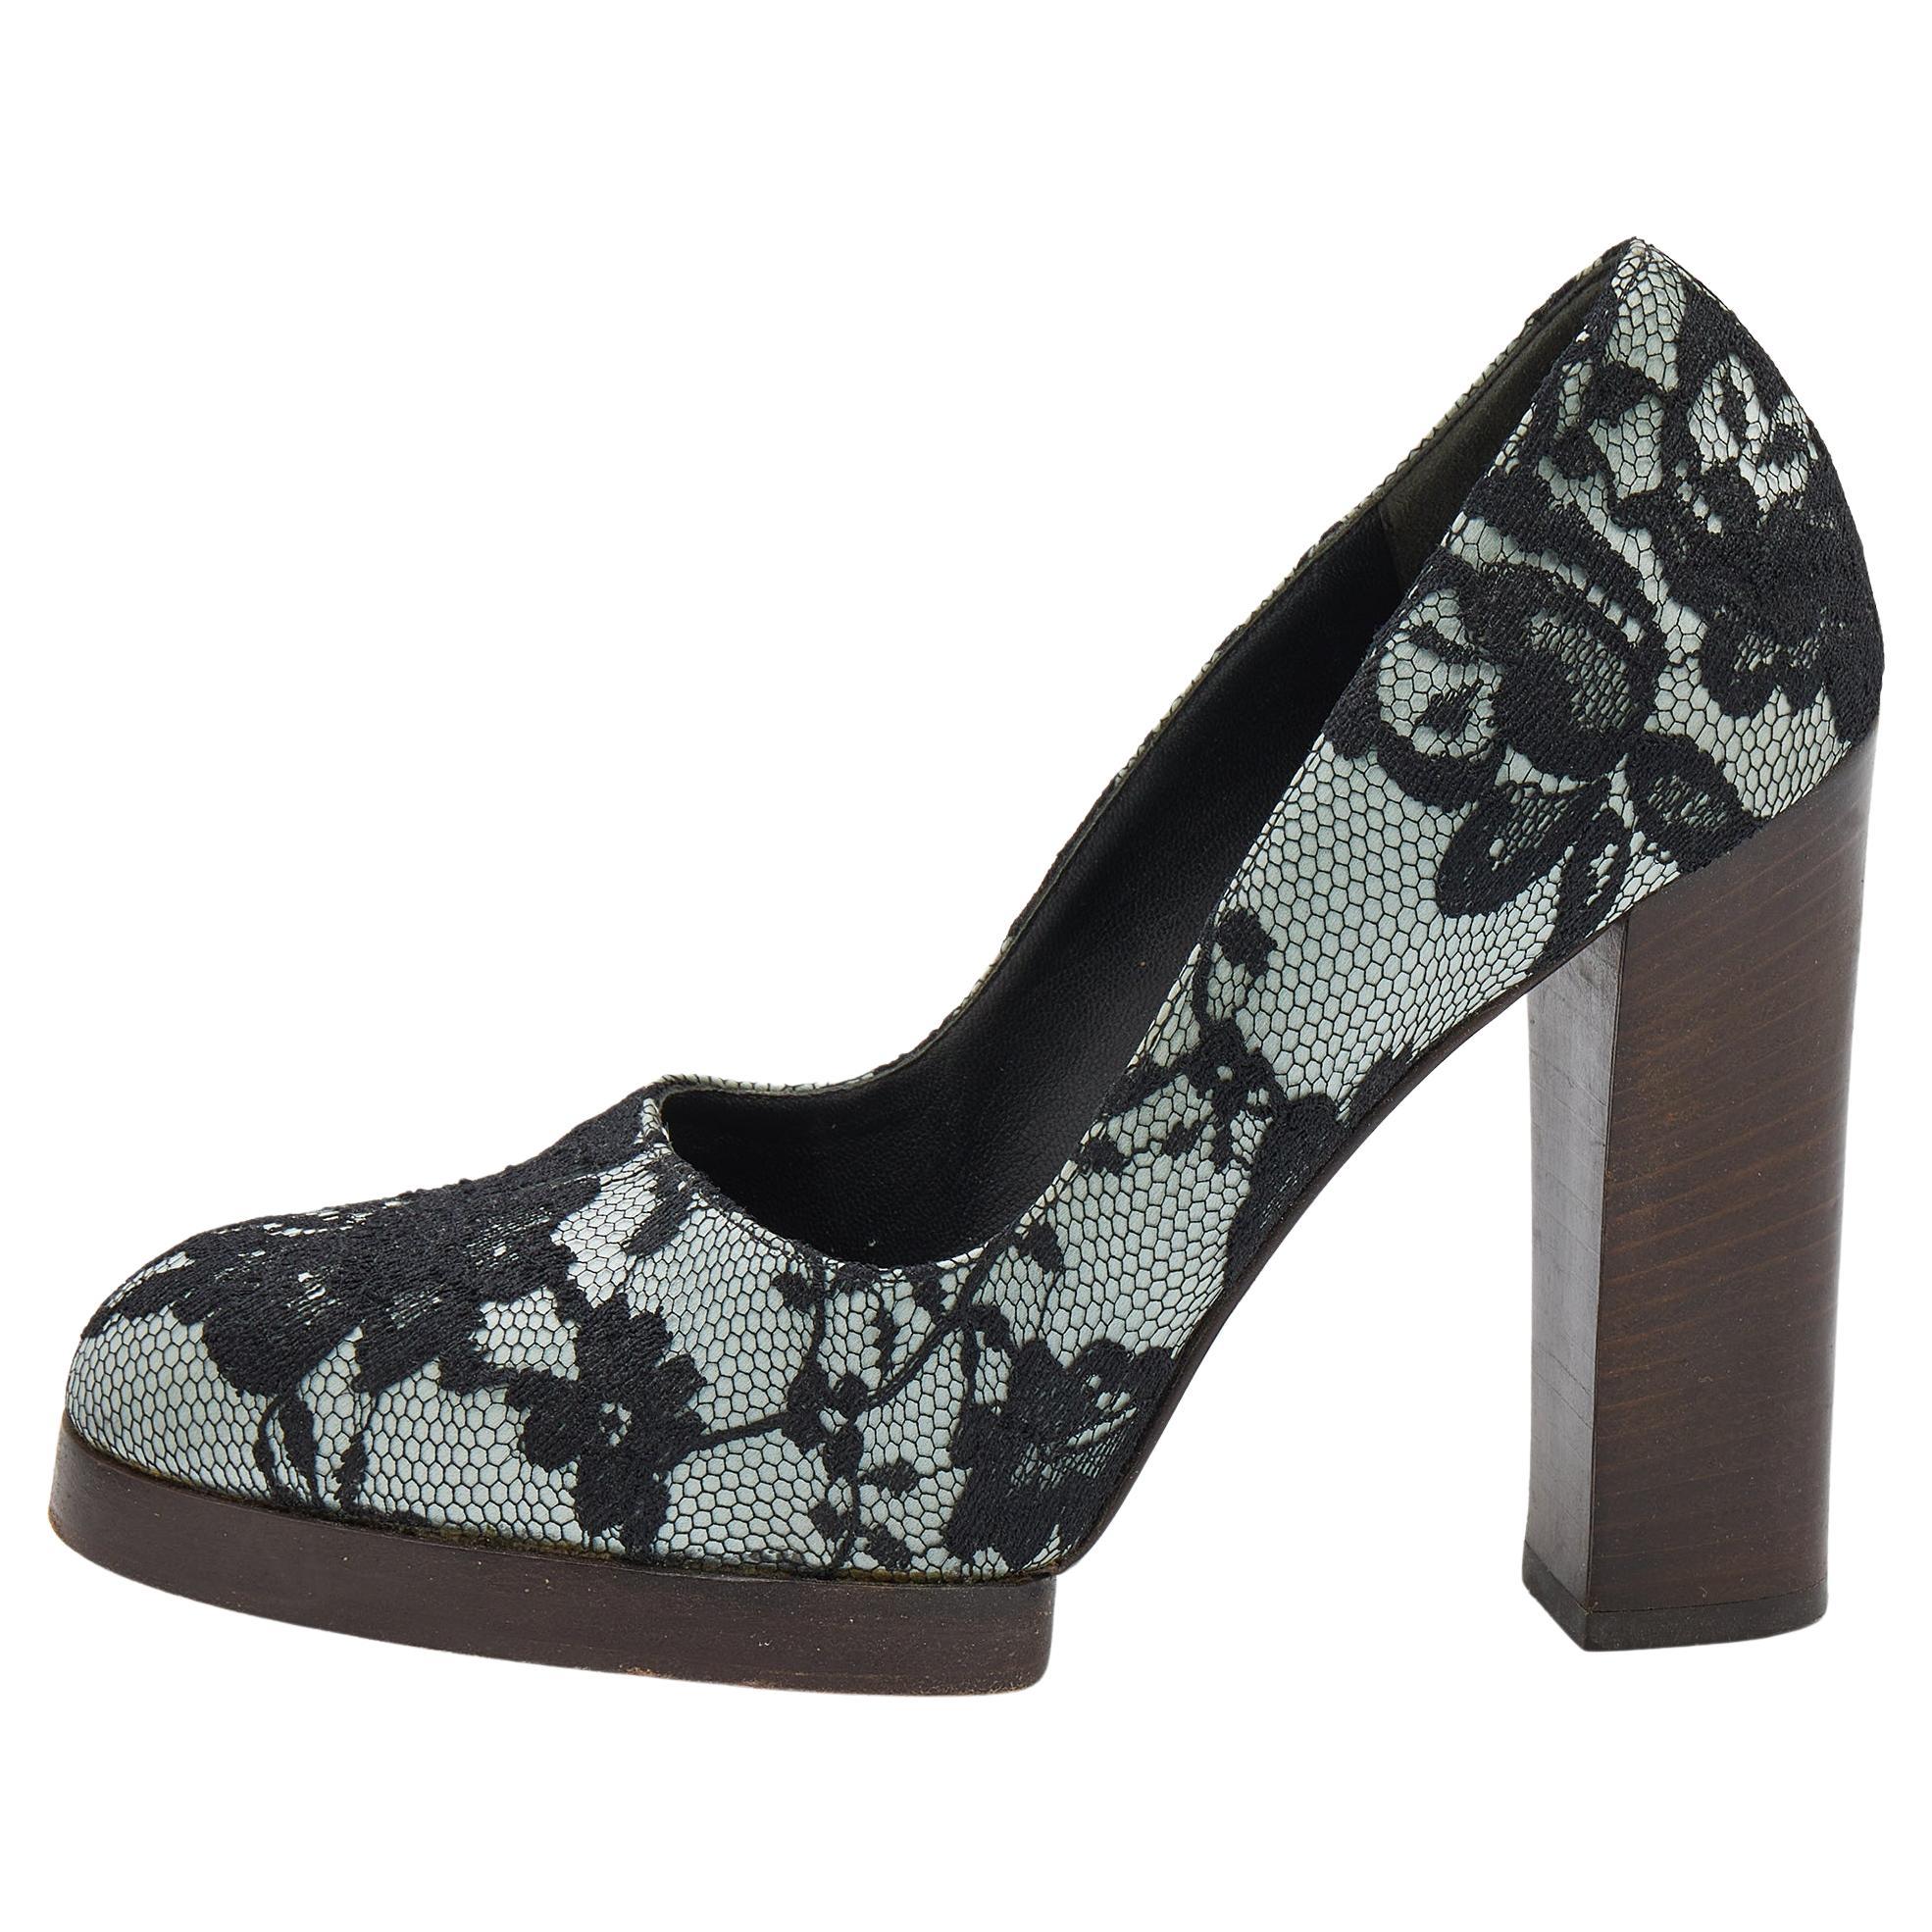 Gucci Black/Grey Floral Lace And Satin Block Heel Pumps Size 36 For Sale